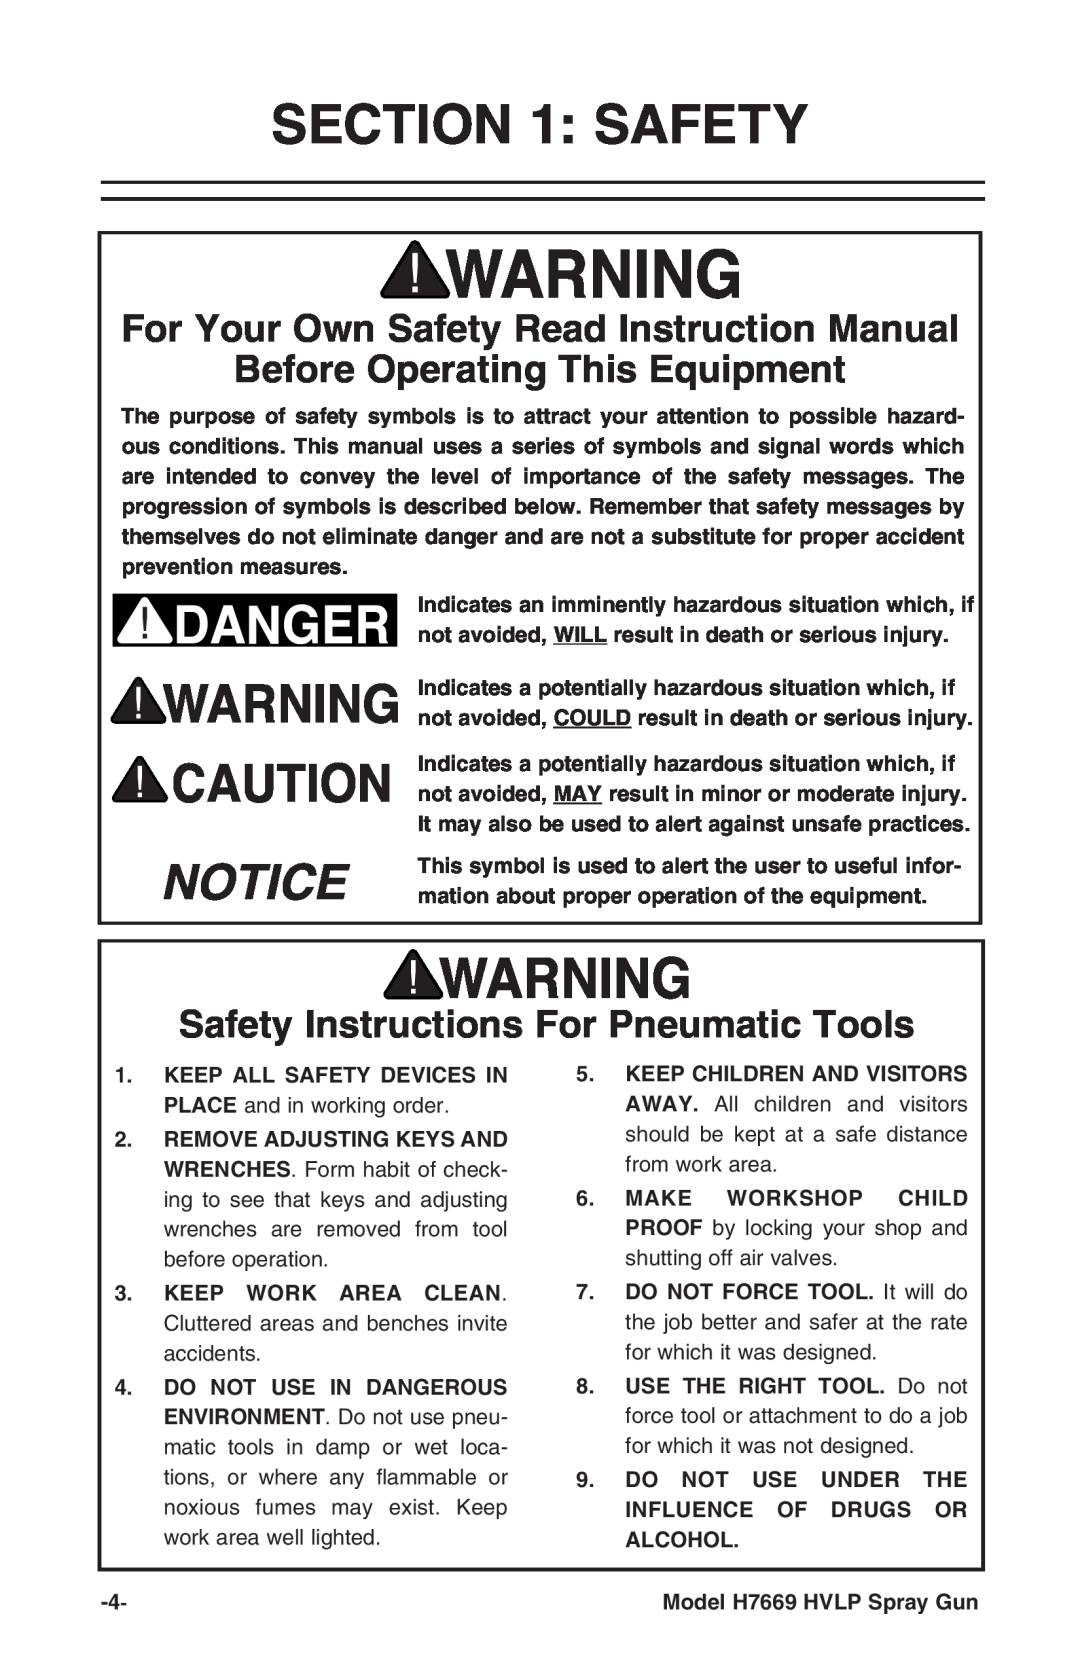 Grizzly H7669 instruction manual Before Operating This Equipment, Safety Instructions For Pneumatic Tools 